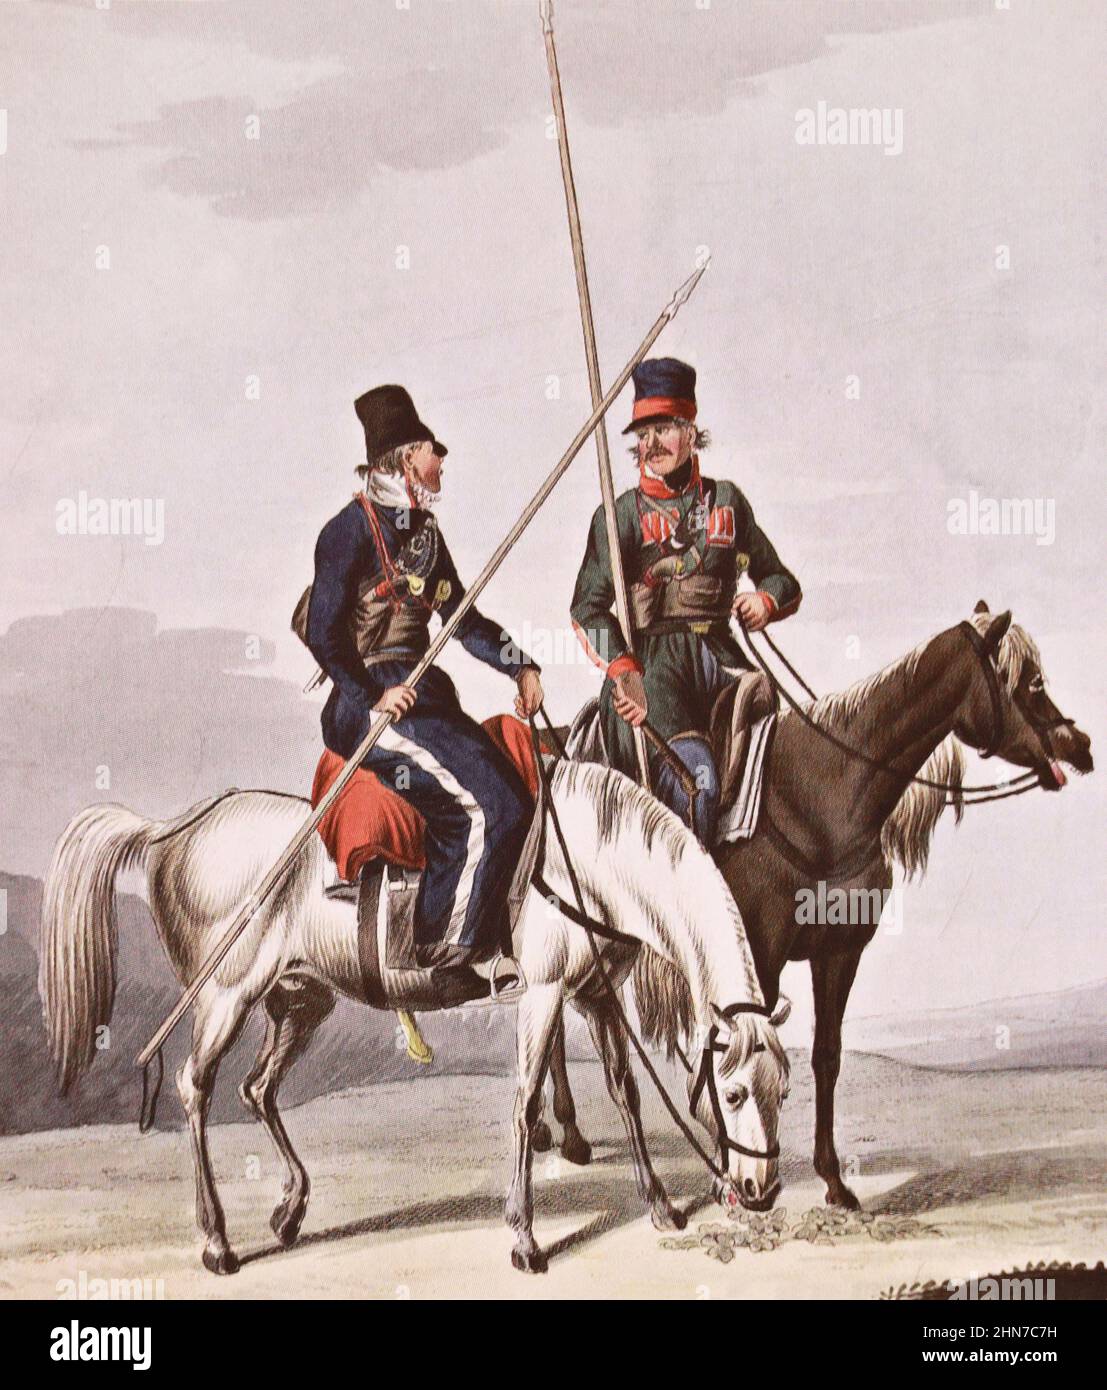 Cossack of the Don Cossack regiments and a Cossack of the Crimean Tatar horse regiments. Engraving from 1814. Stock Photo